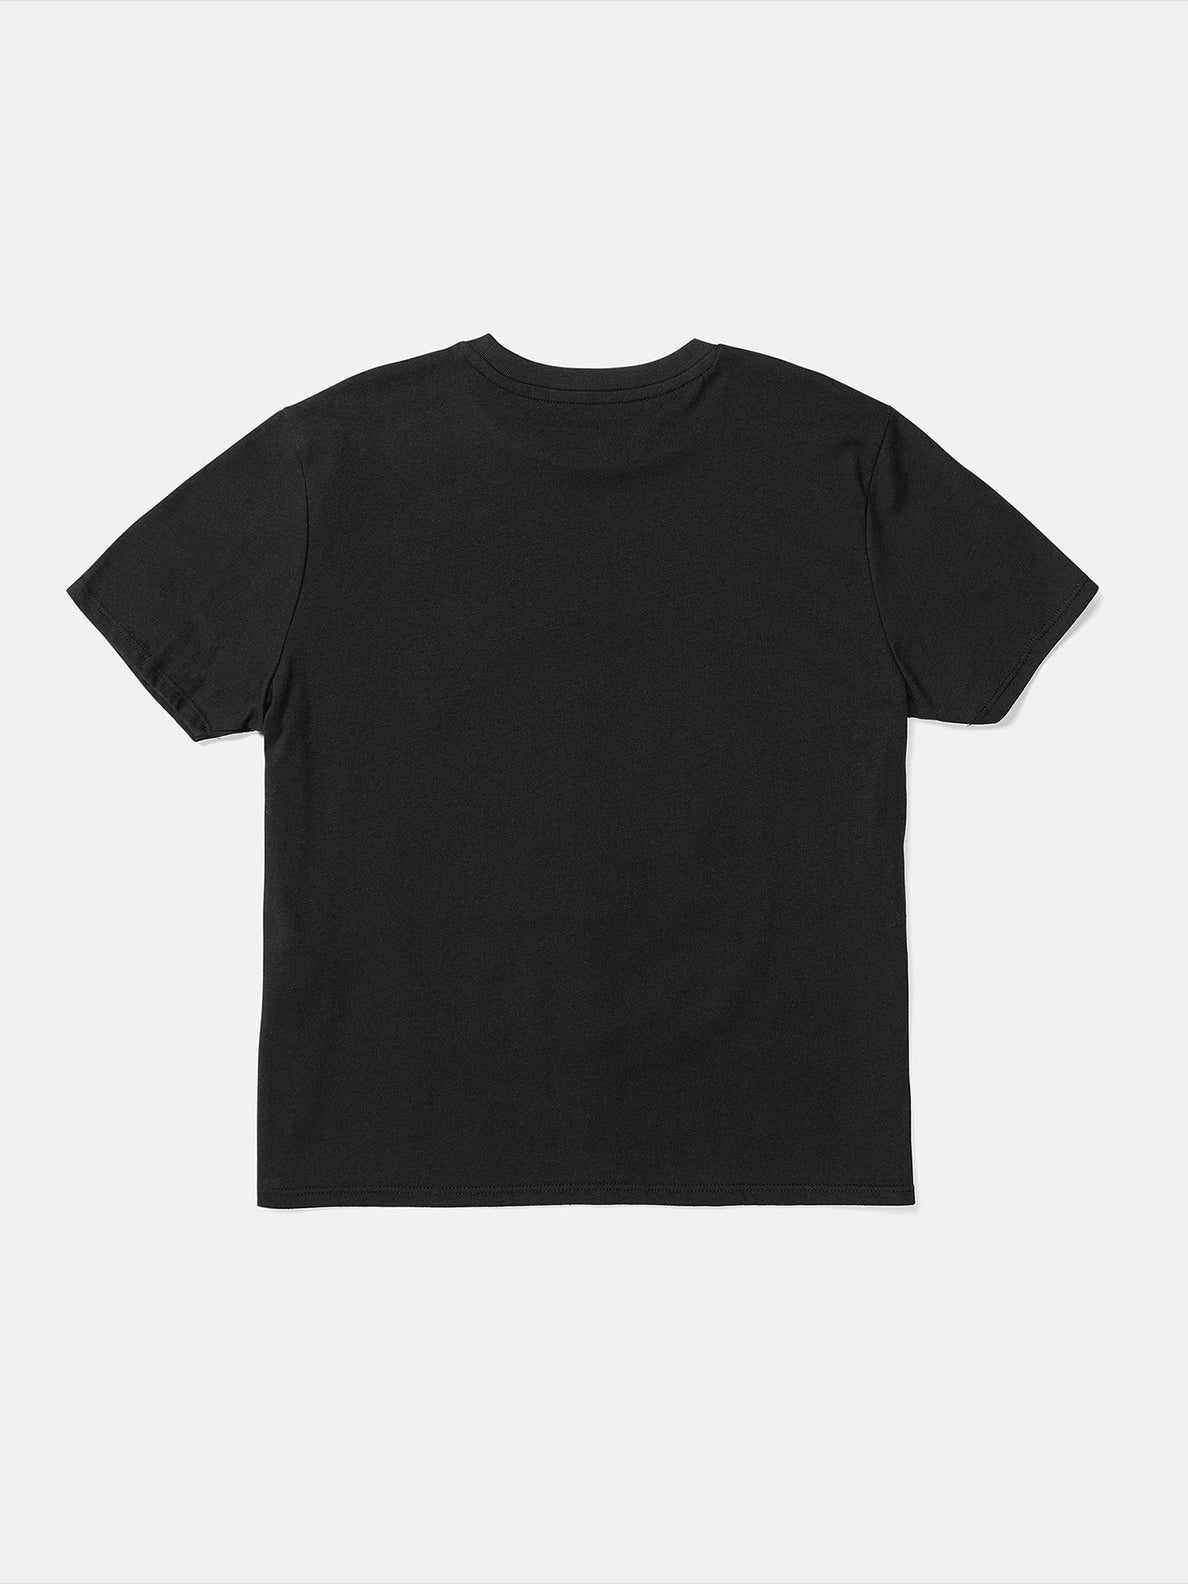 Girls Truly Stoked Bf Tee - Black